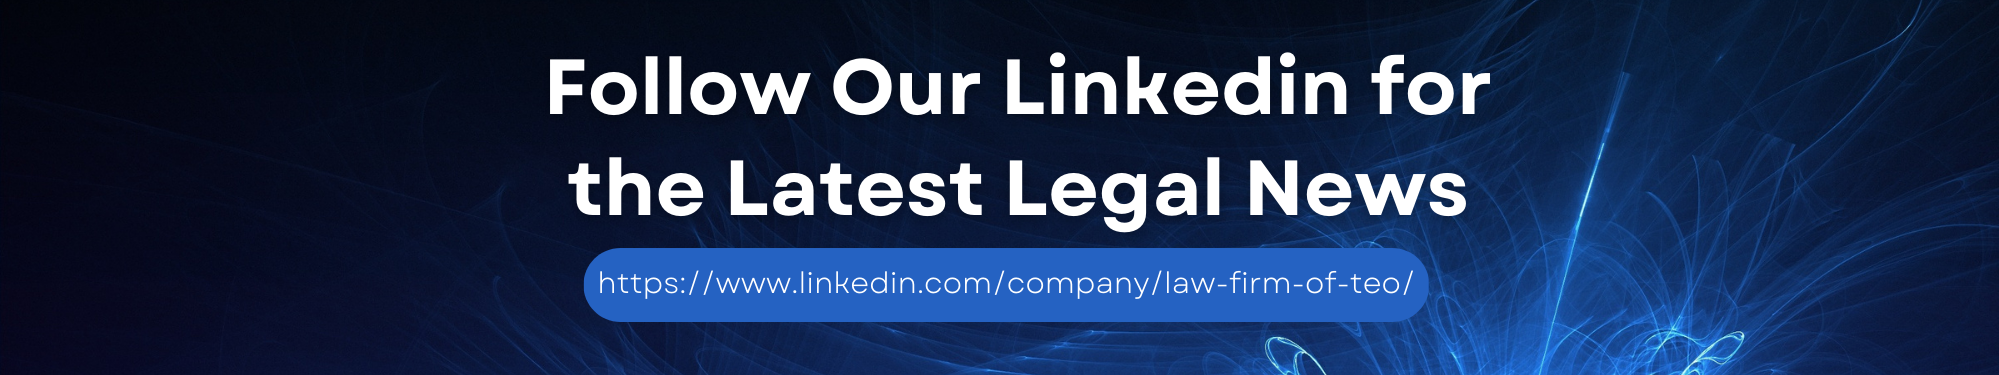 Law Firm of Teo Linkedin